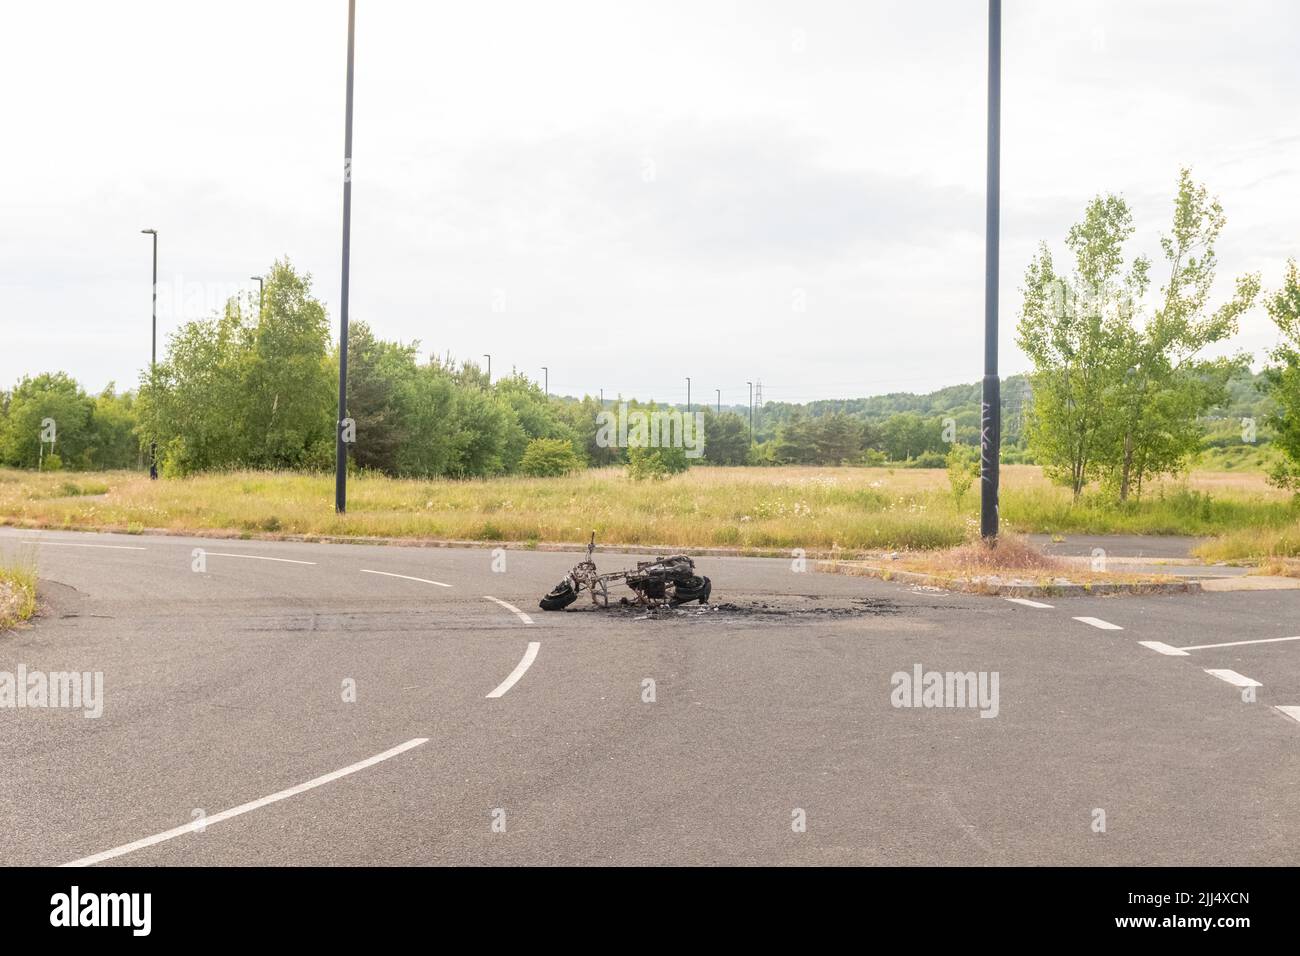 Newburn England: 16.06.2022: stolen motorbike set on fire burned out and abandoned on industrial estate Road with green trees Stock Photo